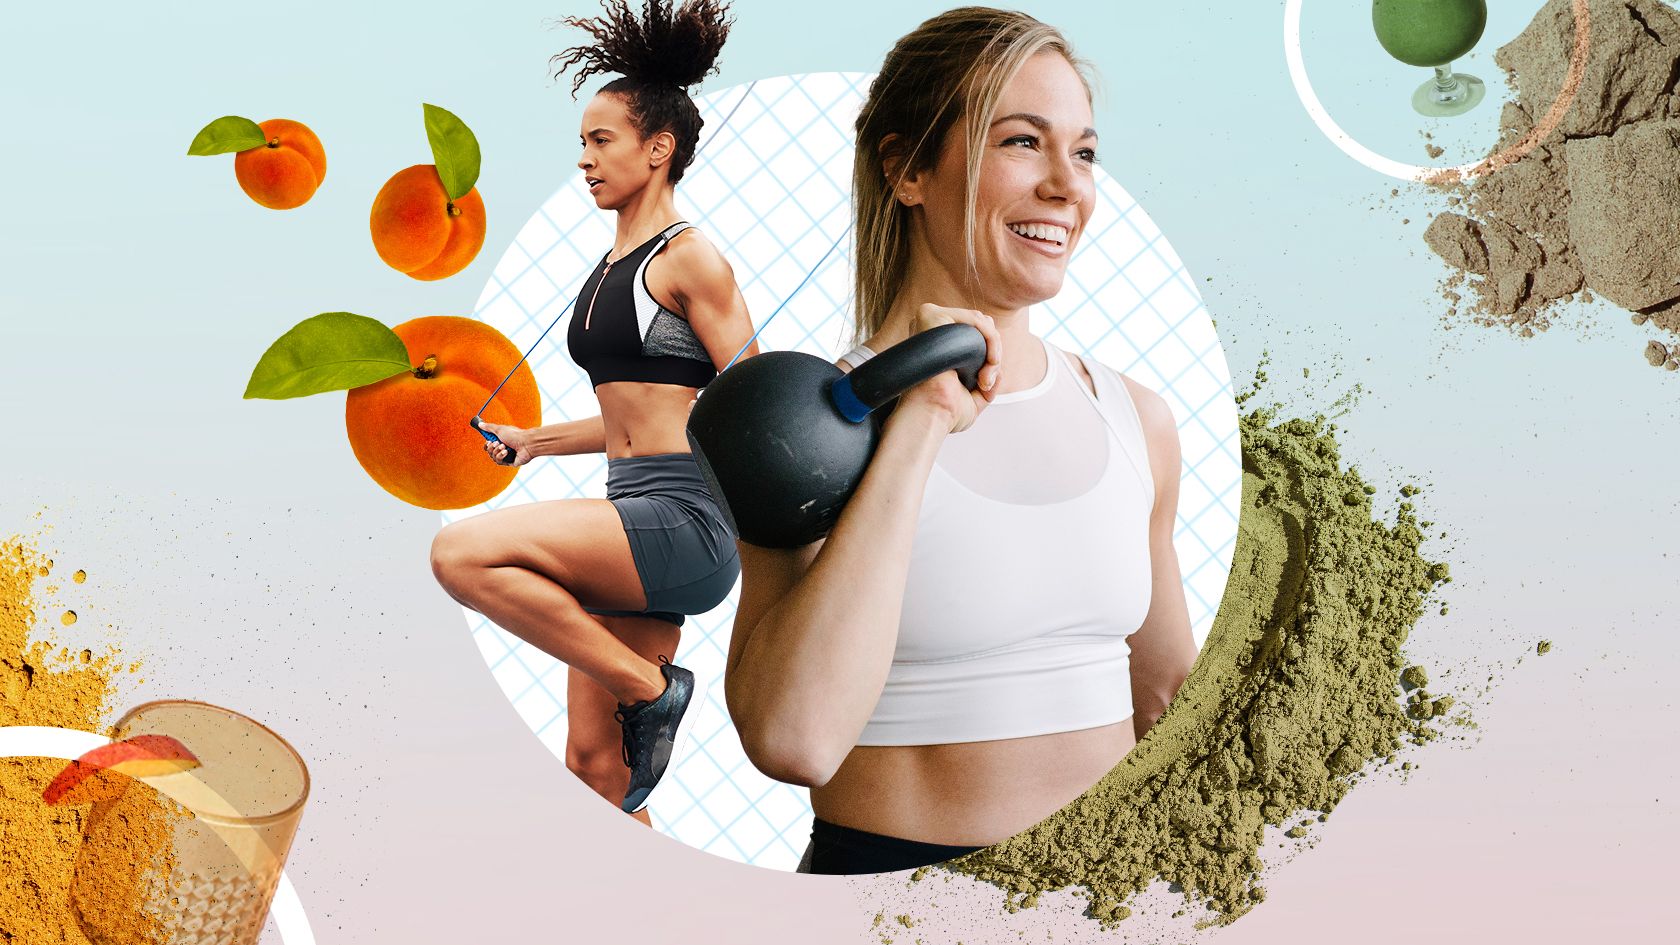 Food for fitness – which superfoods to eat before a workout